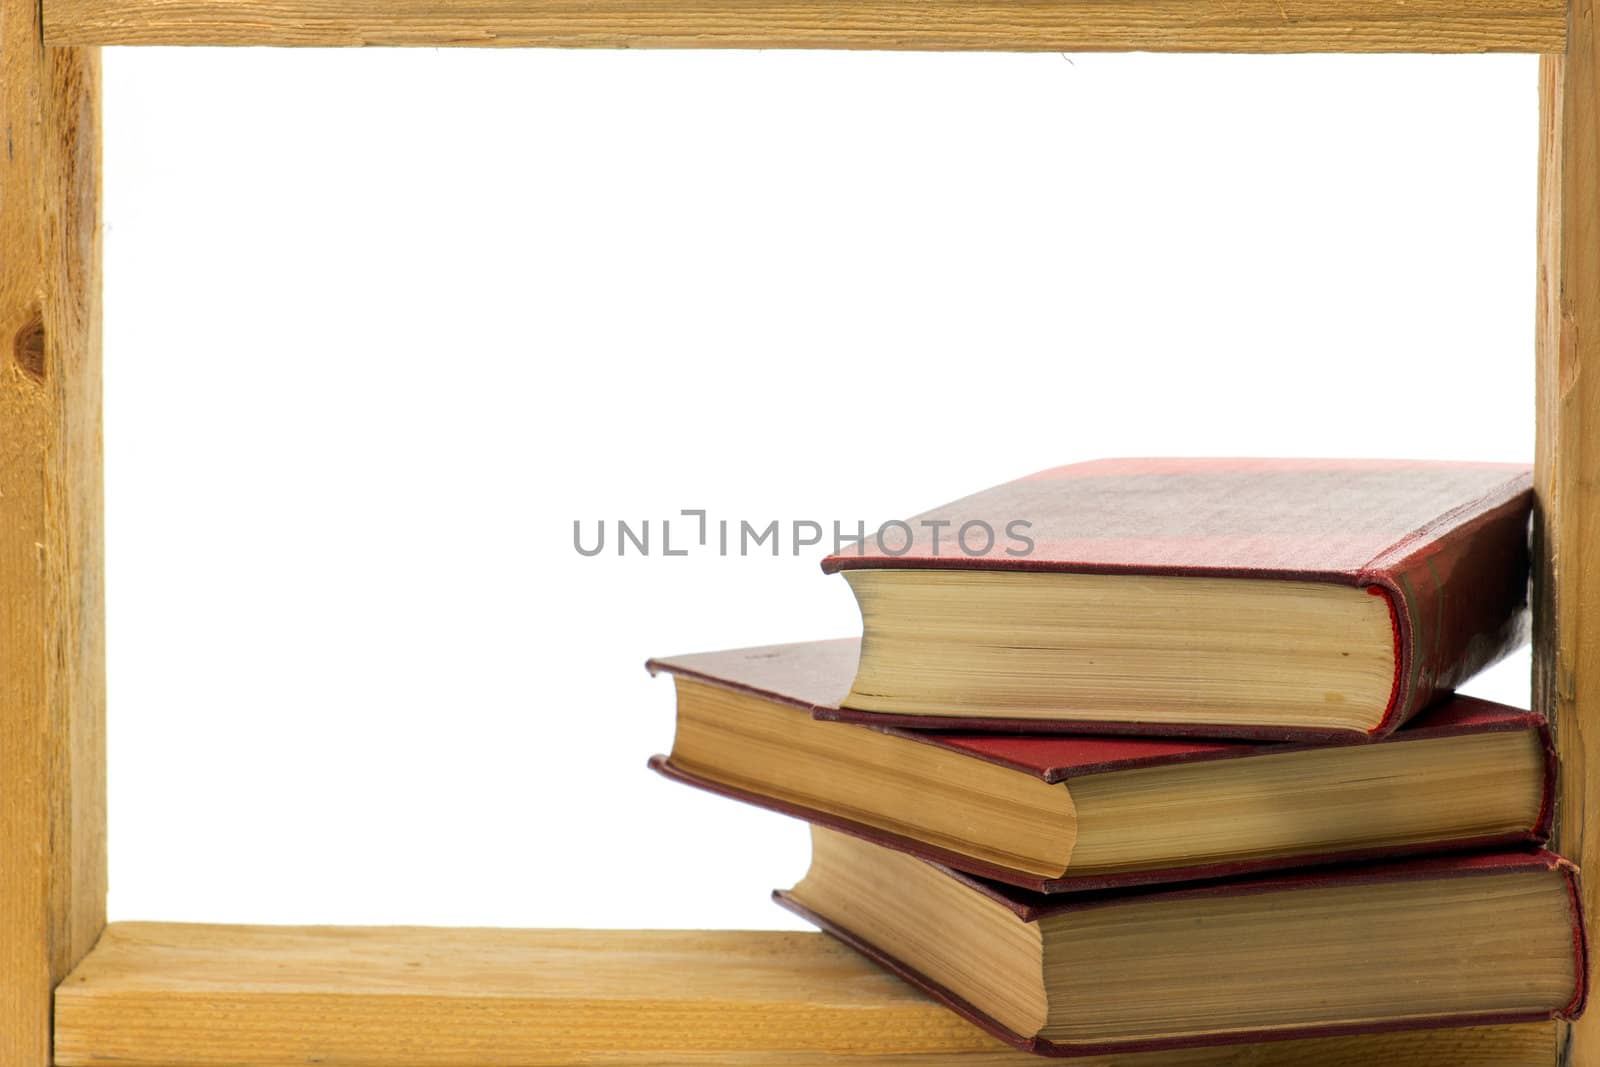 Some books with hard dark red covers in a wooden frame on white background